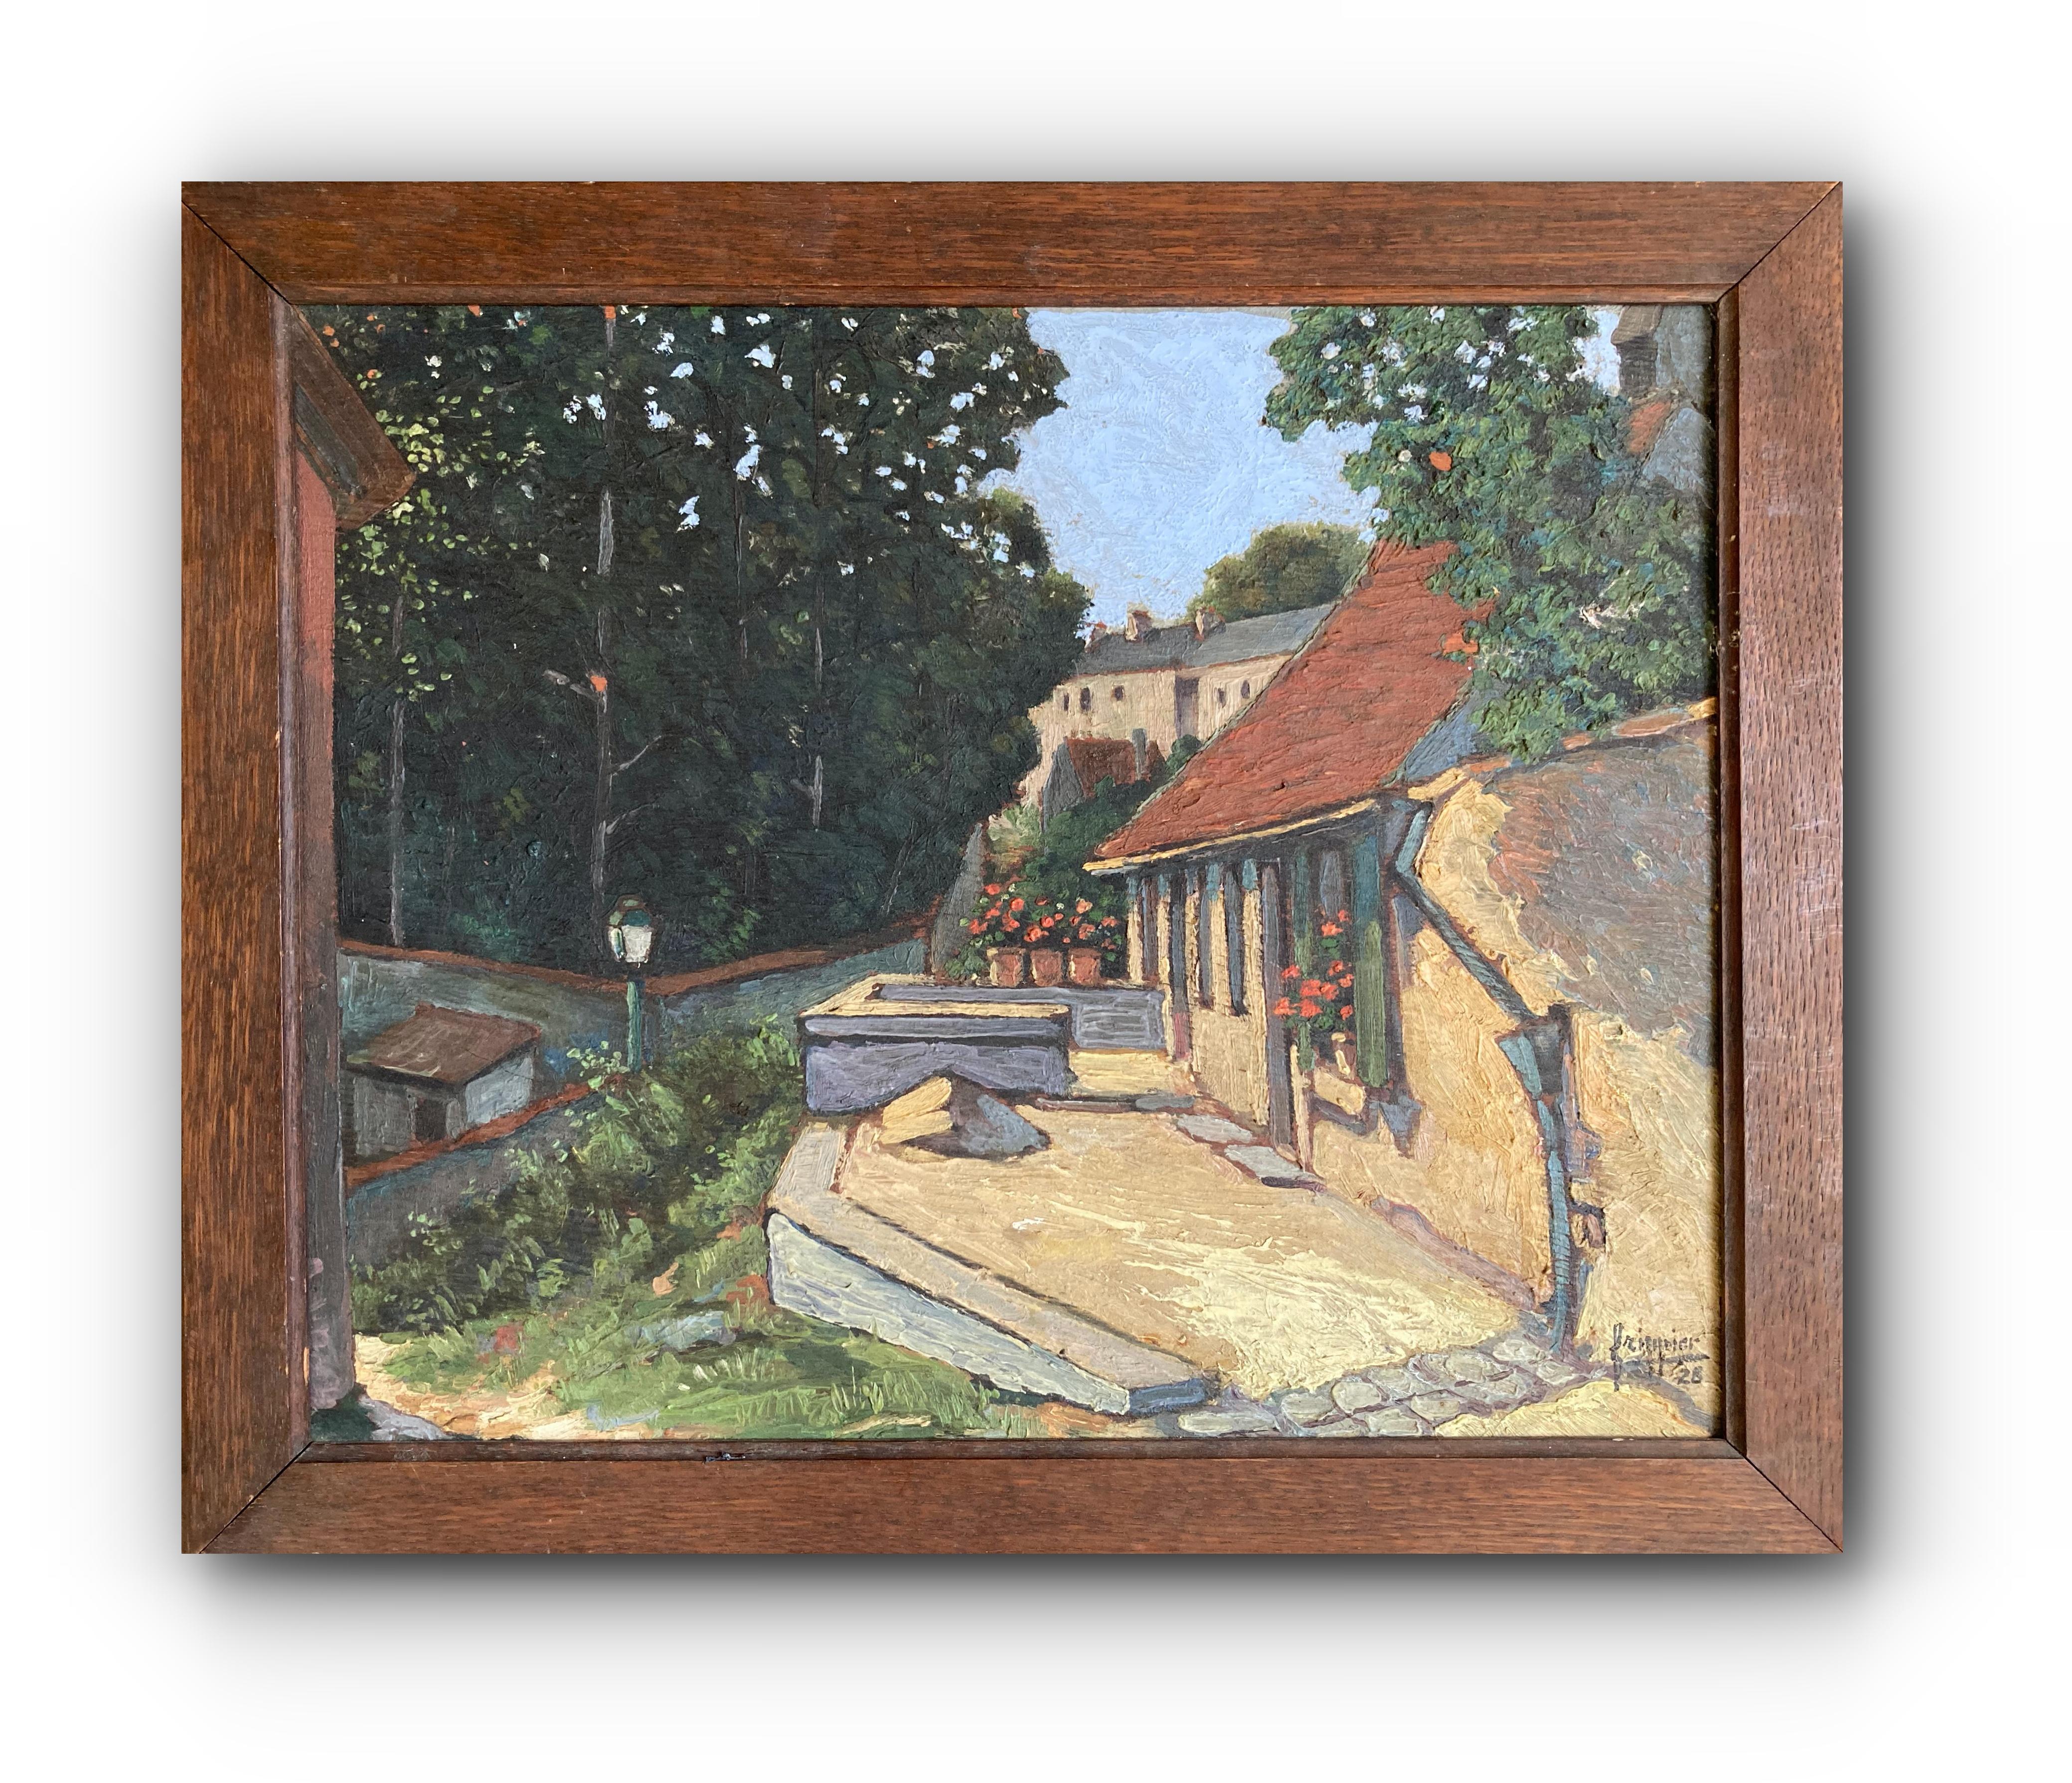 A lovely, peaceful view across the patio of a stone house in a forested countryside. This painting was imported from England, but the architecture appears Mediterranean to me. It is signed, but I cannot make out the signature in order to identify